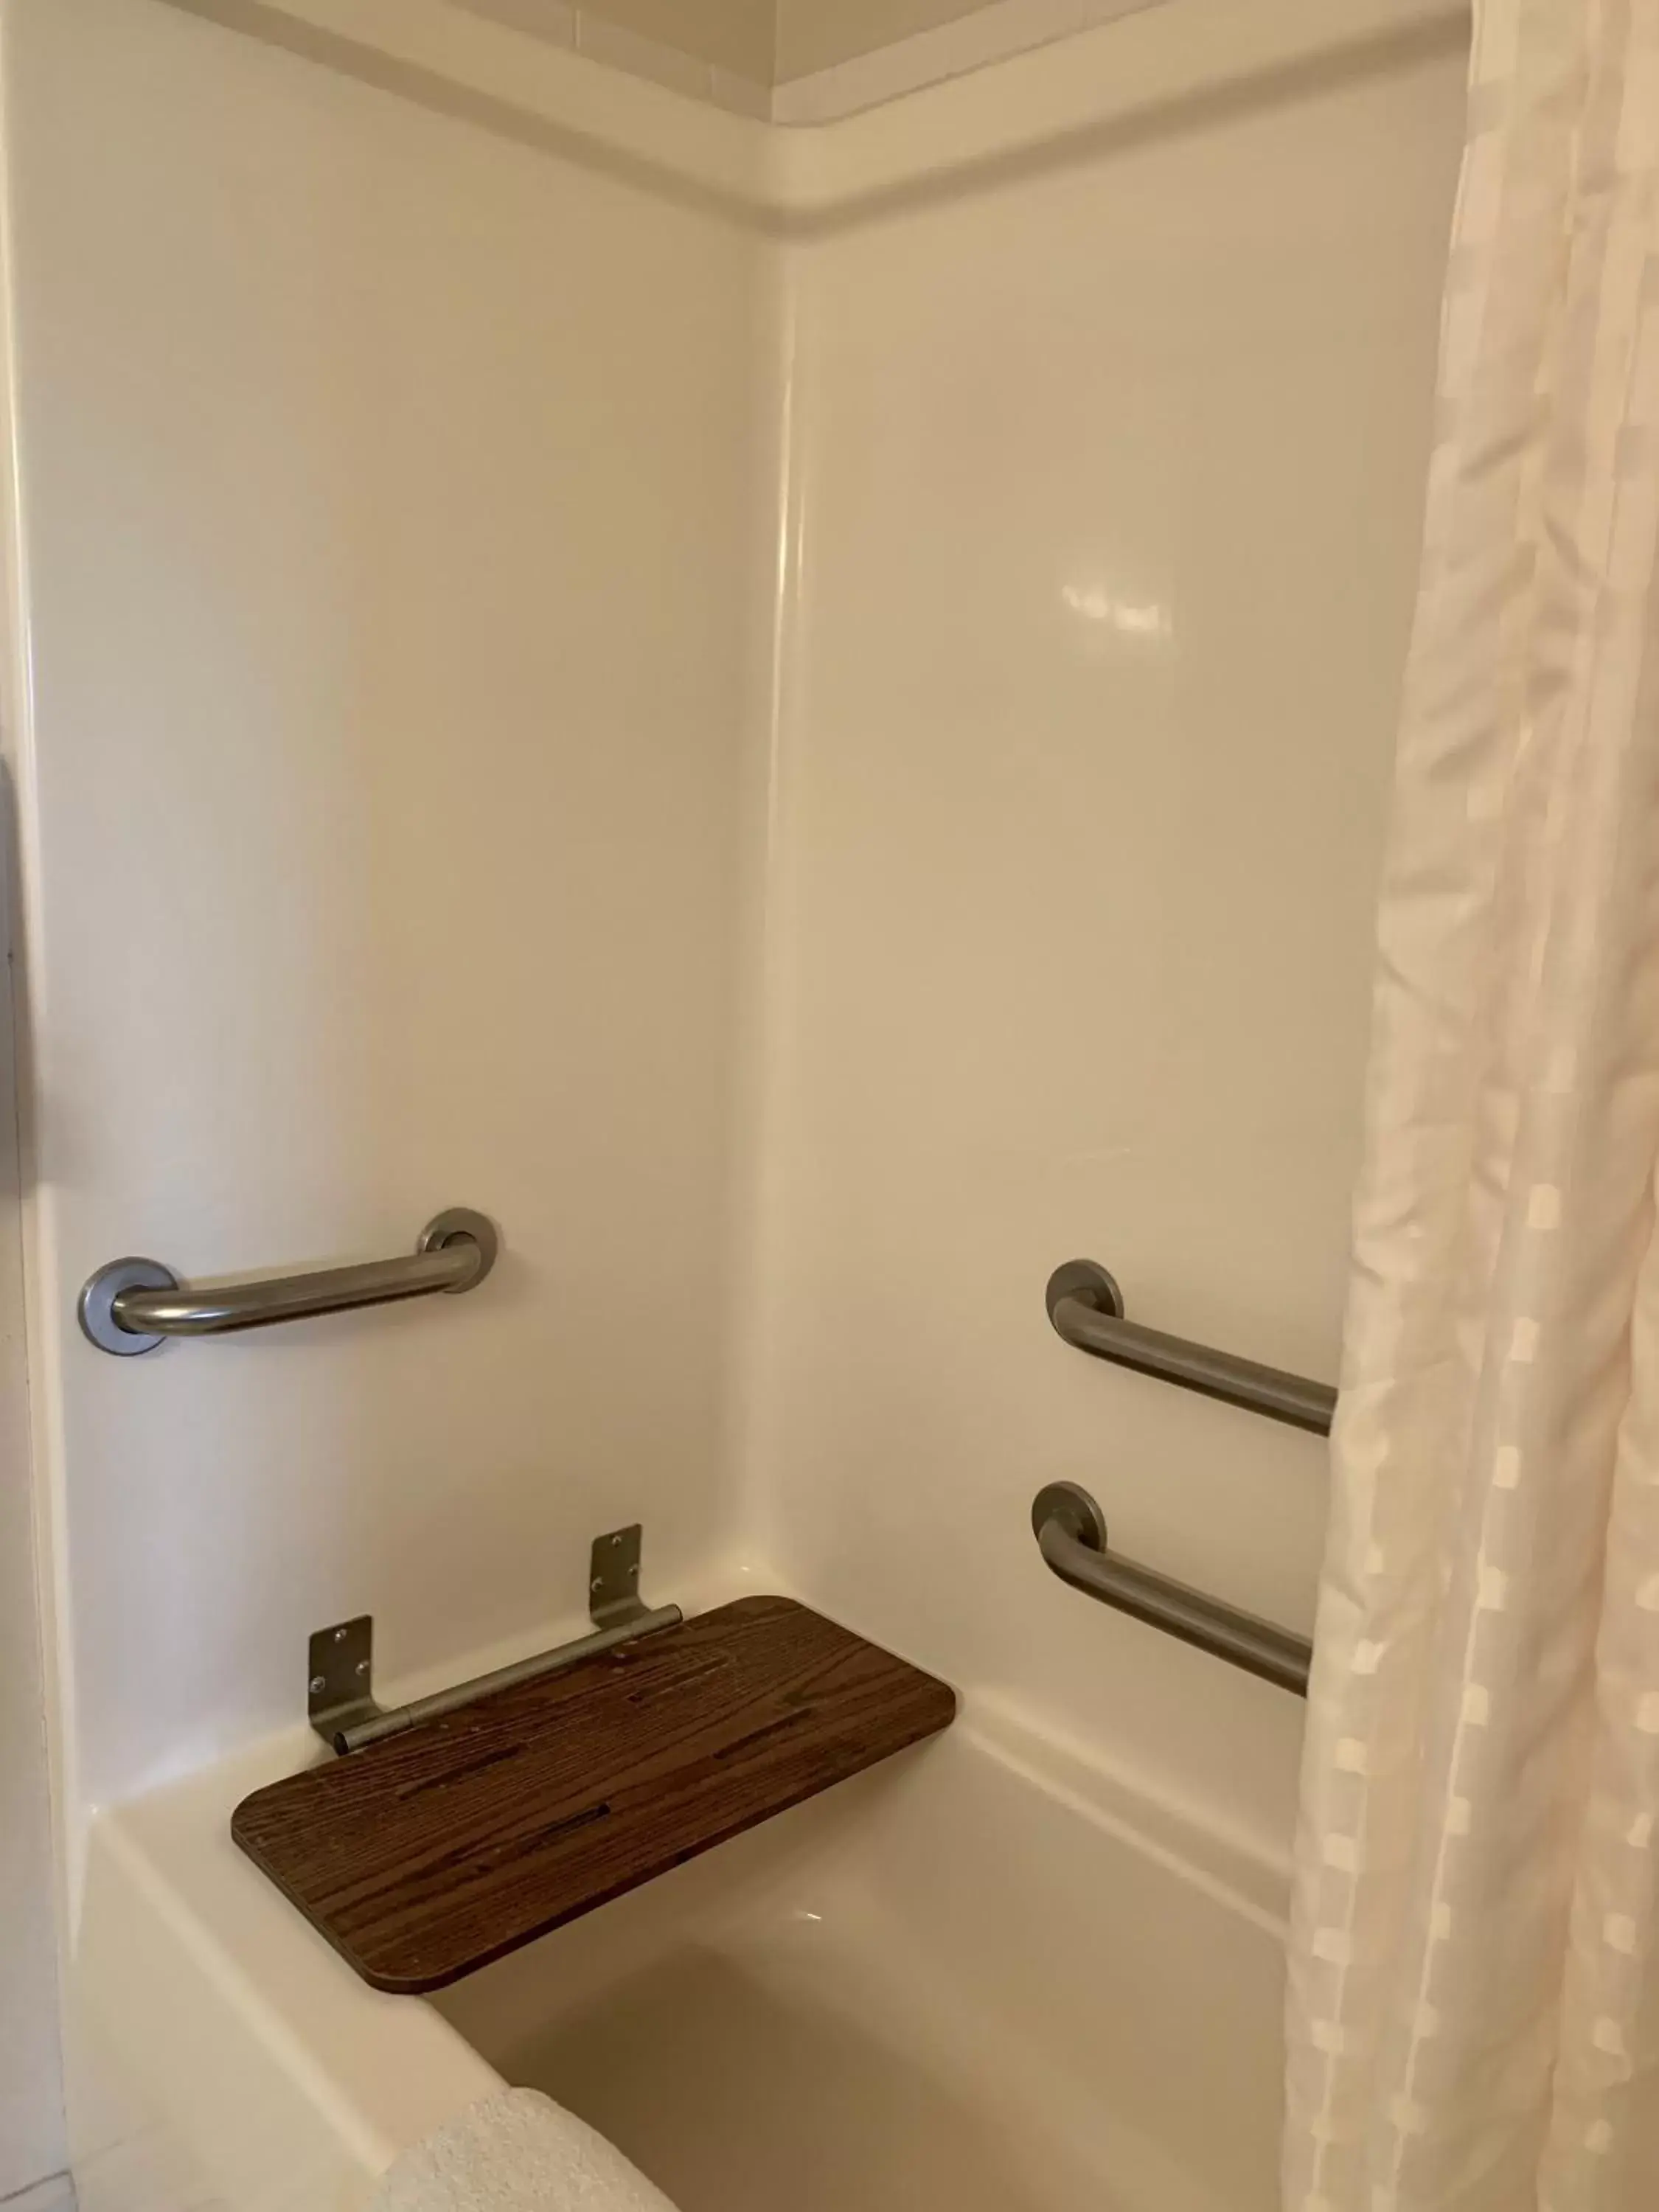 Facility for disabled guests, Bathroom in Mariners Suites - Kingsland